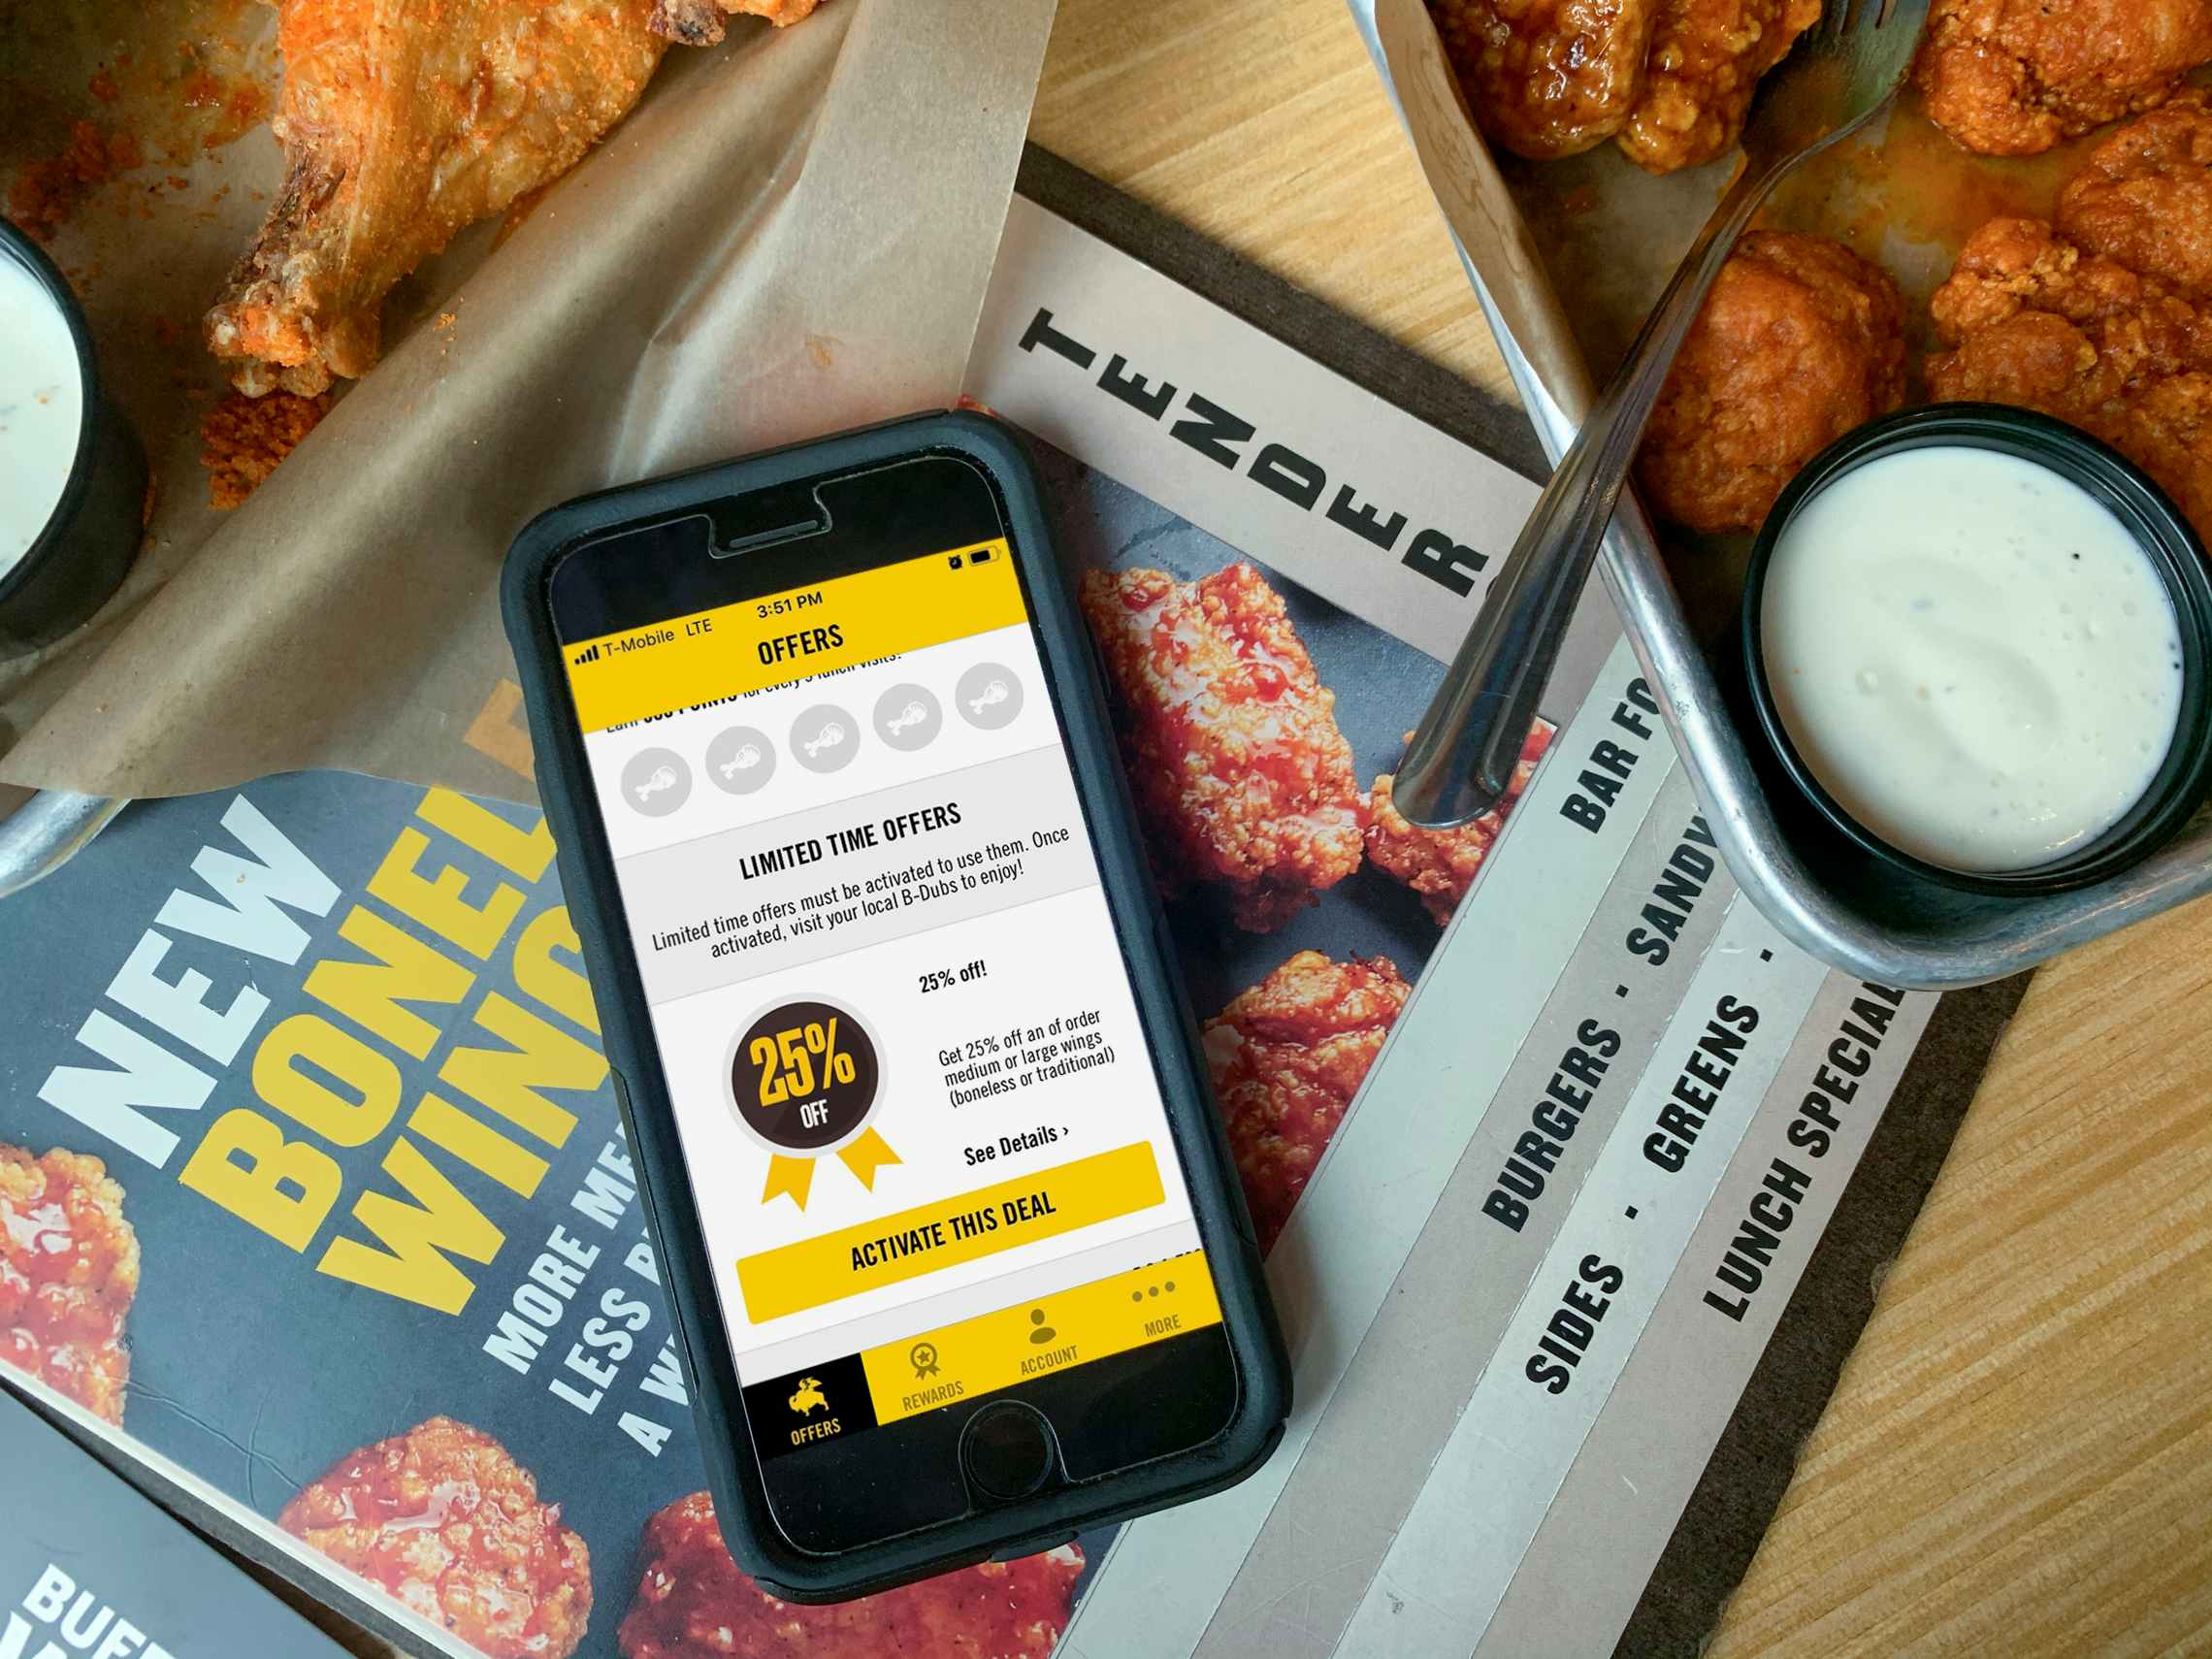 An iPhone sitting on top of a menu on a table, open to the Buffalo Wild Wings app's Offer page. The page shows a 25% off deal that can be activated using the app. To the right of the phone, there is a platter of boneless wings with a fork, and some ranch in a dipping cup.